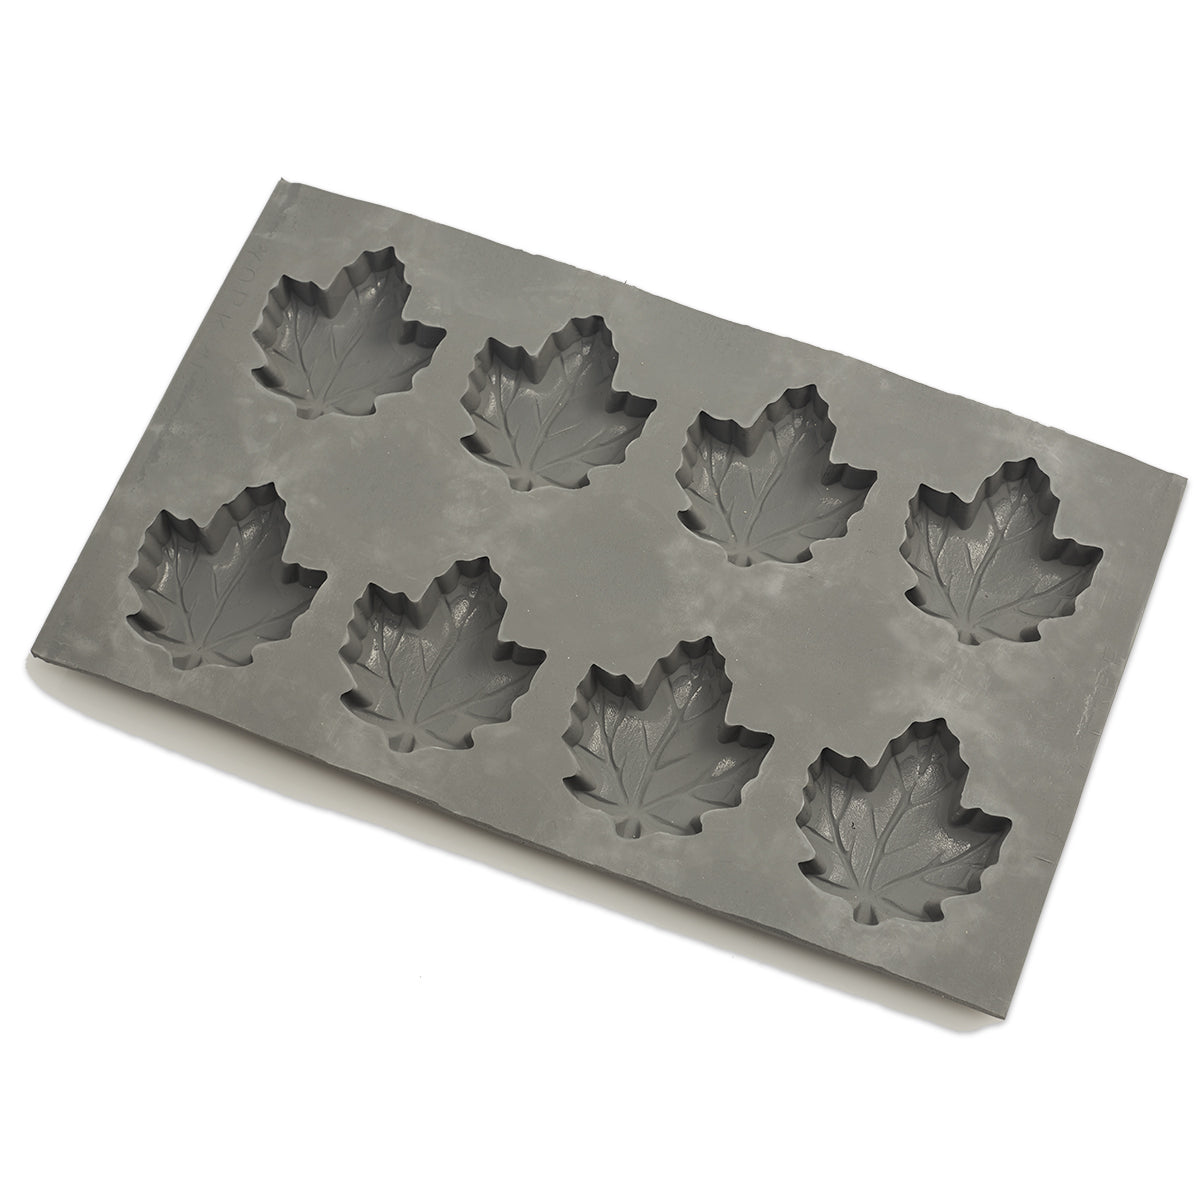 2 oz Maple Leaf Rubber Candy Mold (8 Cavity)